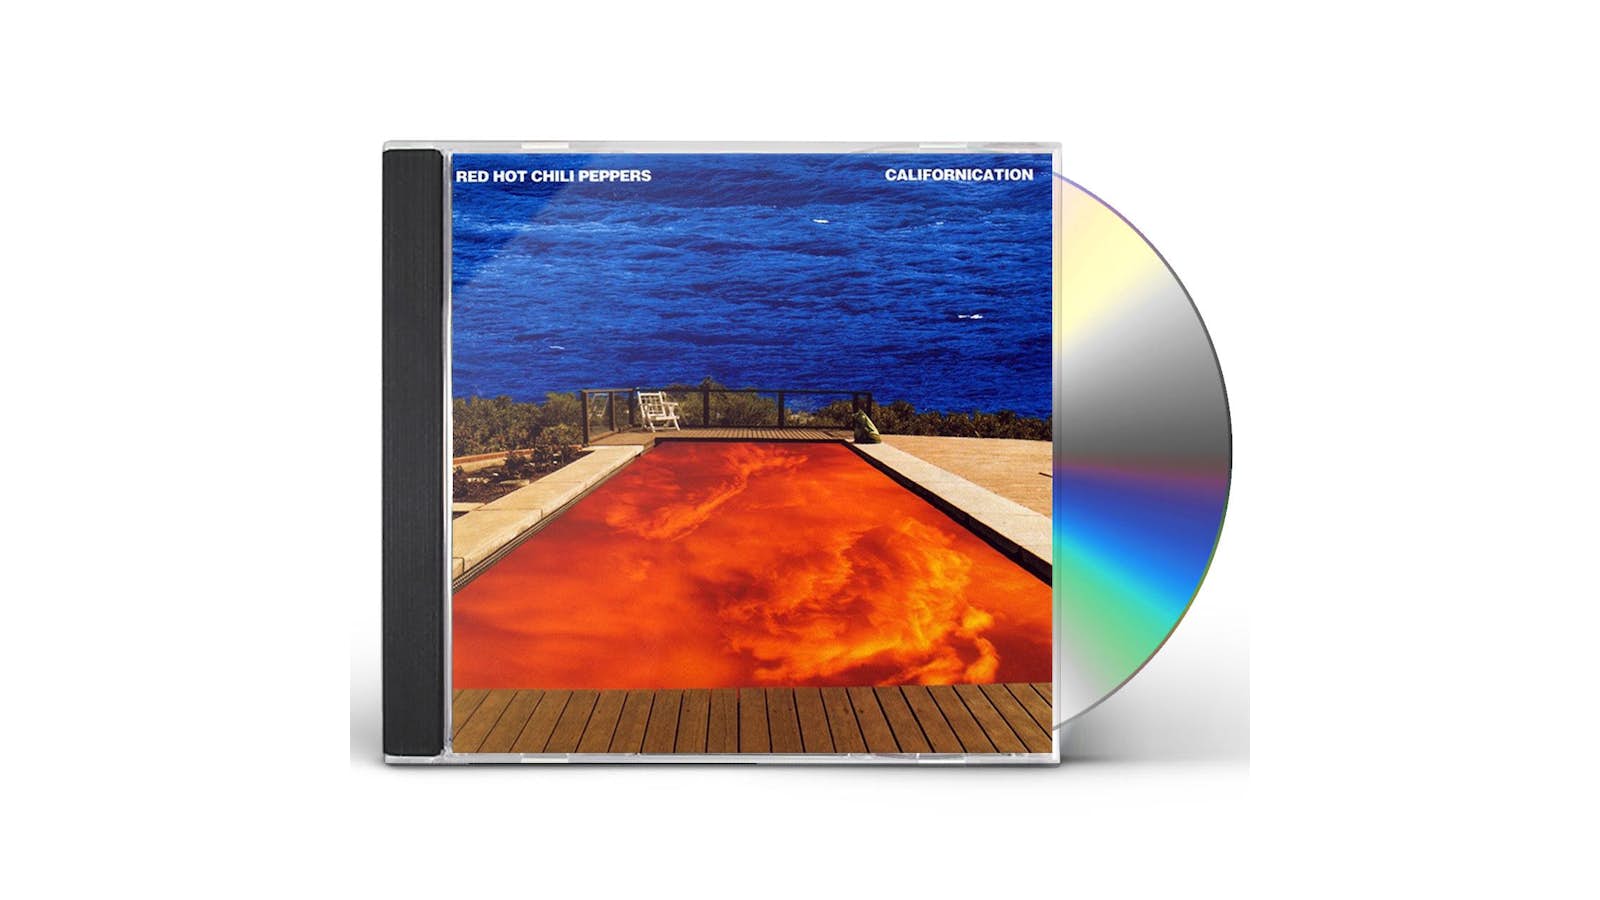 Red Hot Chili Peppers CALIFORNICATION CD